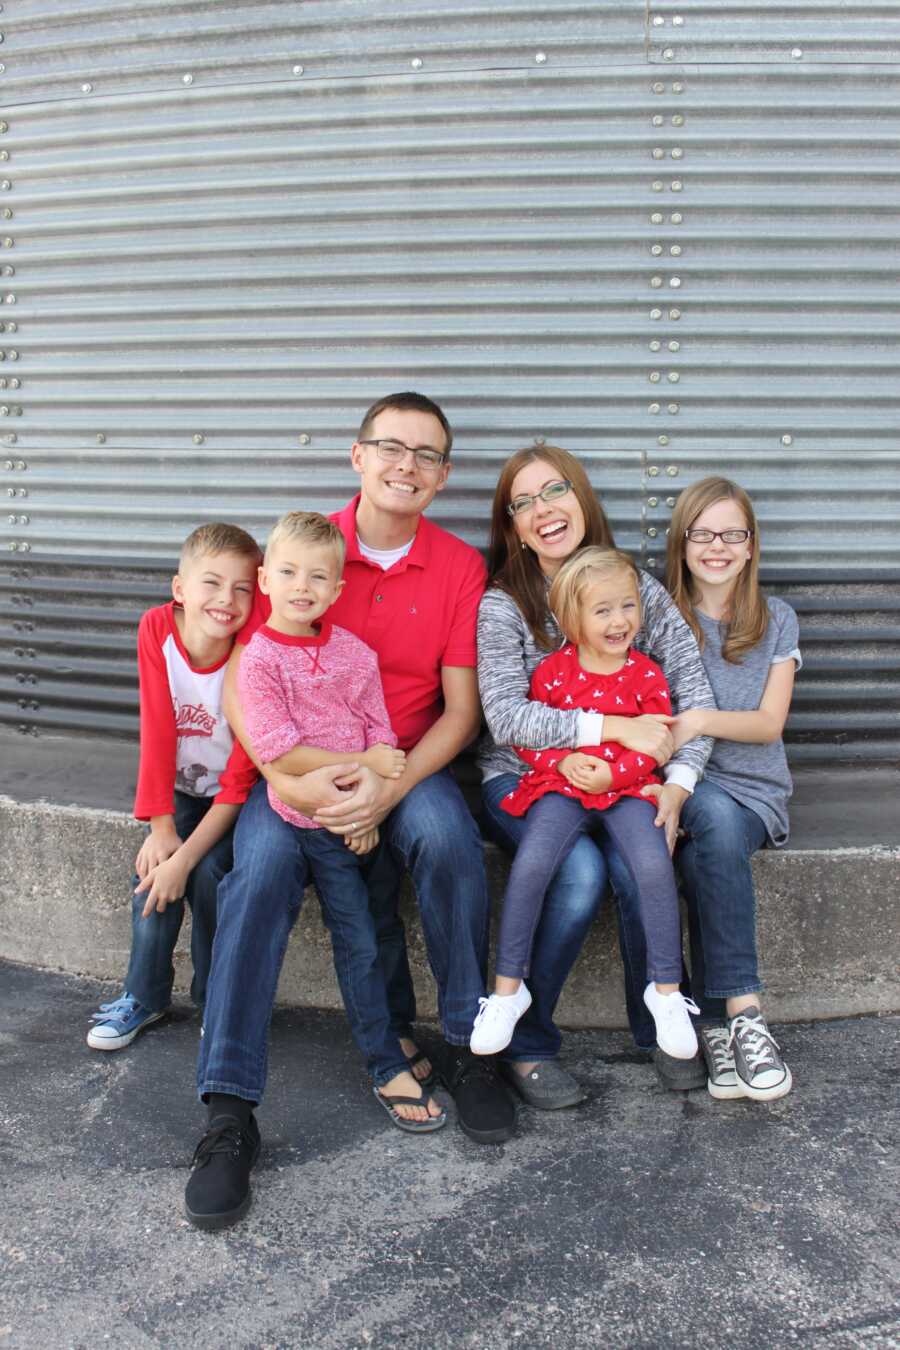 family of 7 in matching red and grey shirts sitting on concrete bench